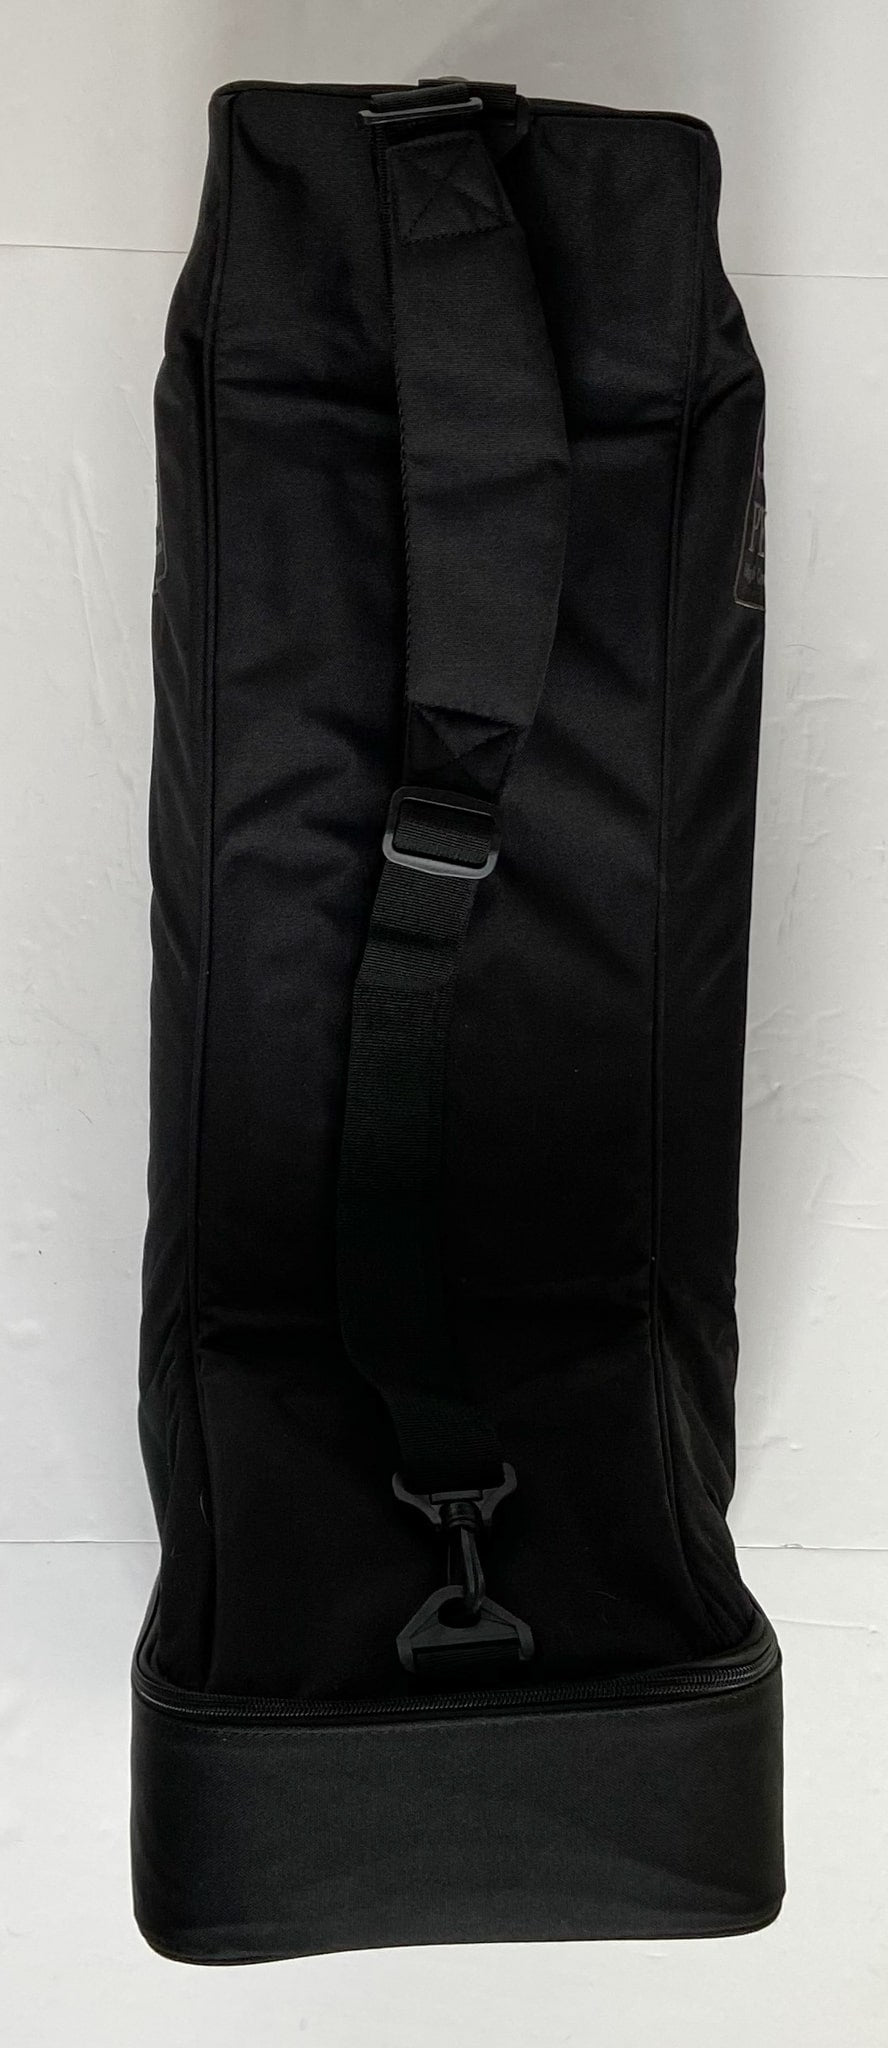 Petrie Boot Bag - Black - One Size